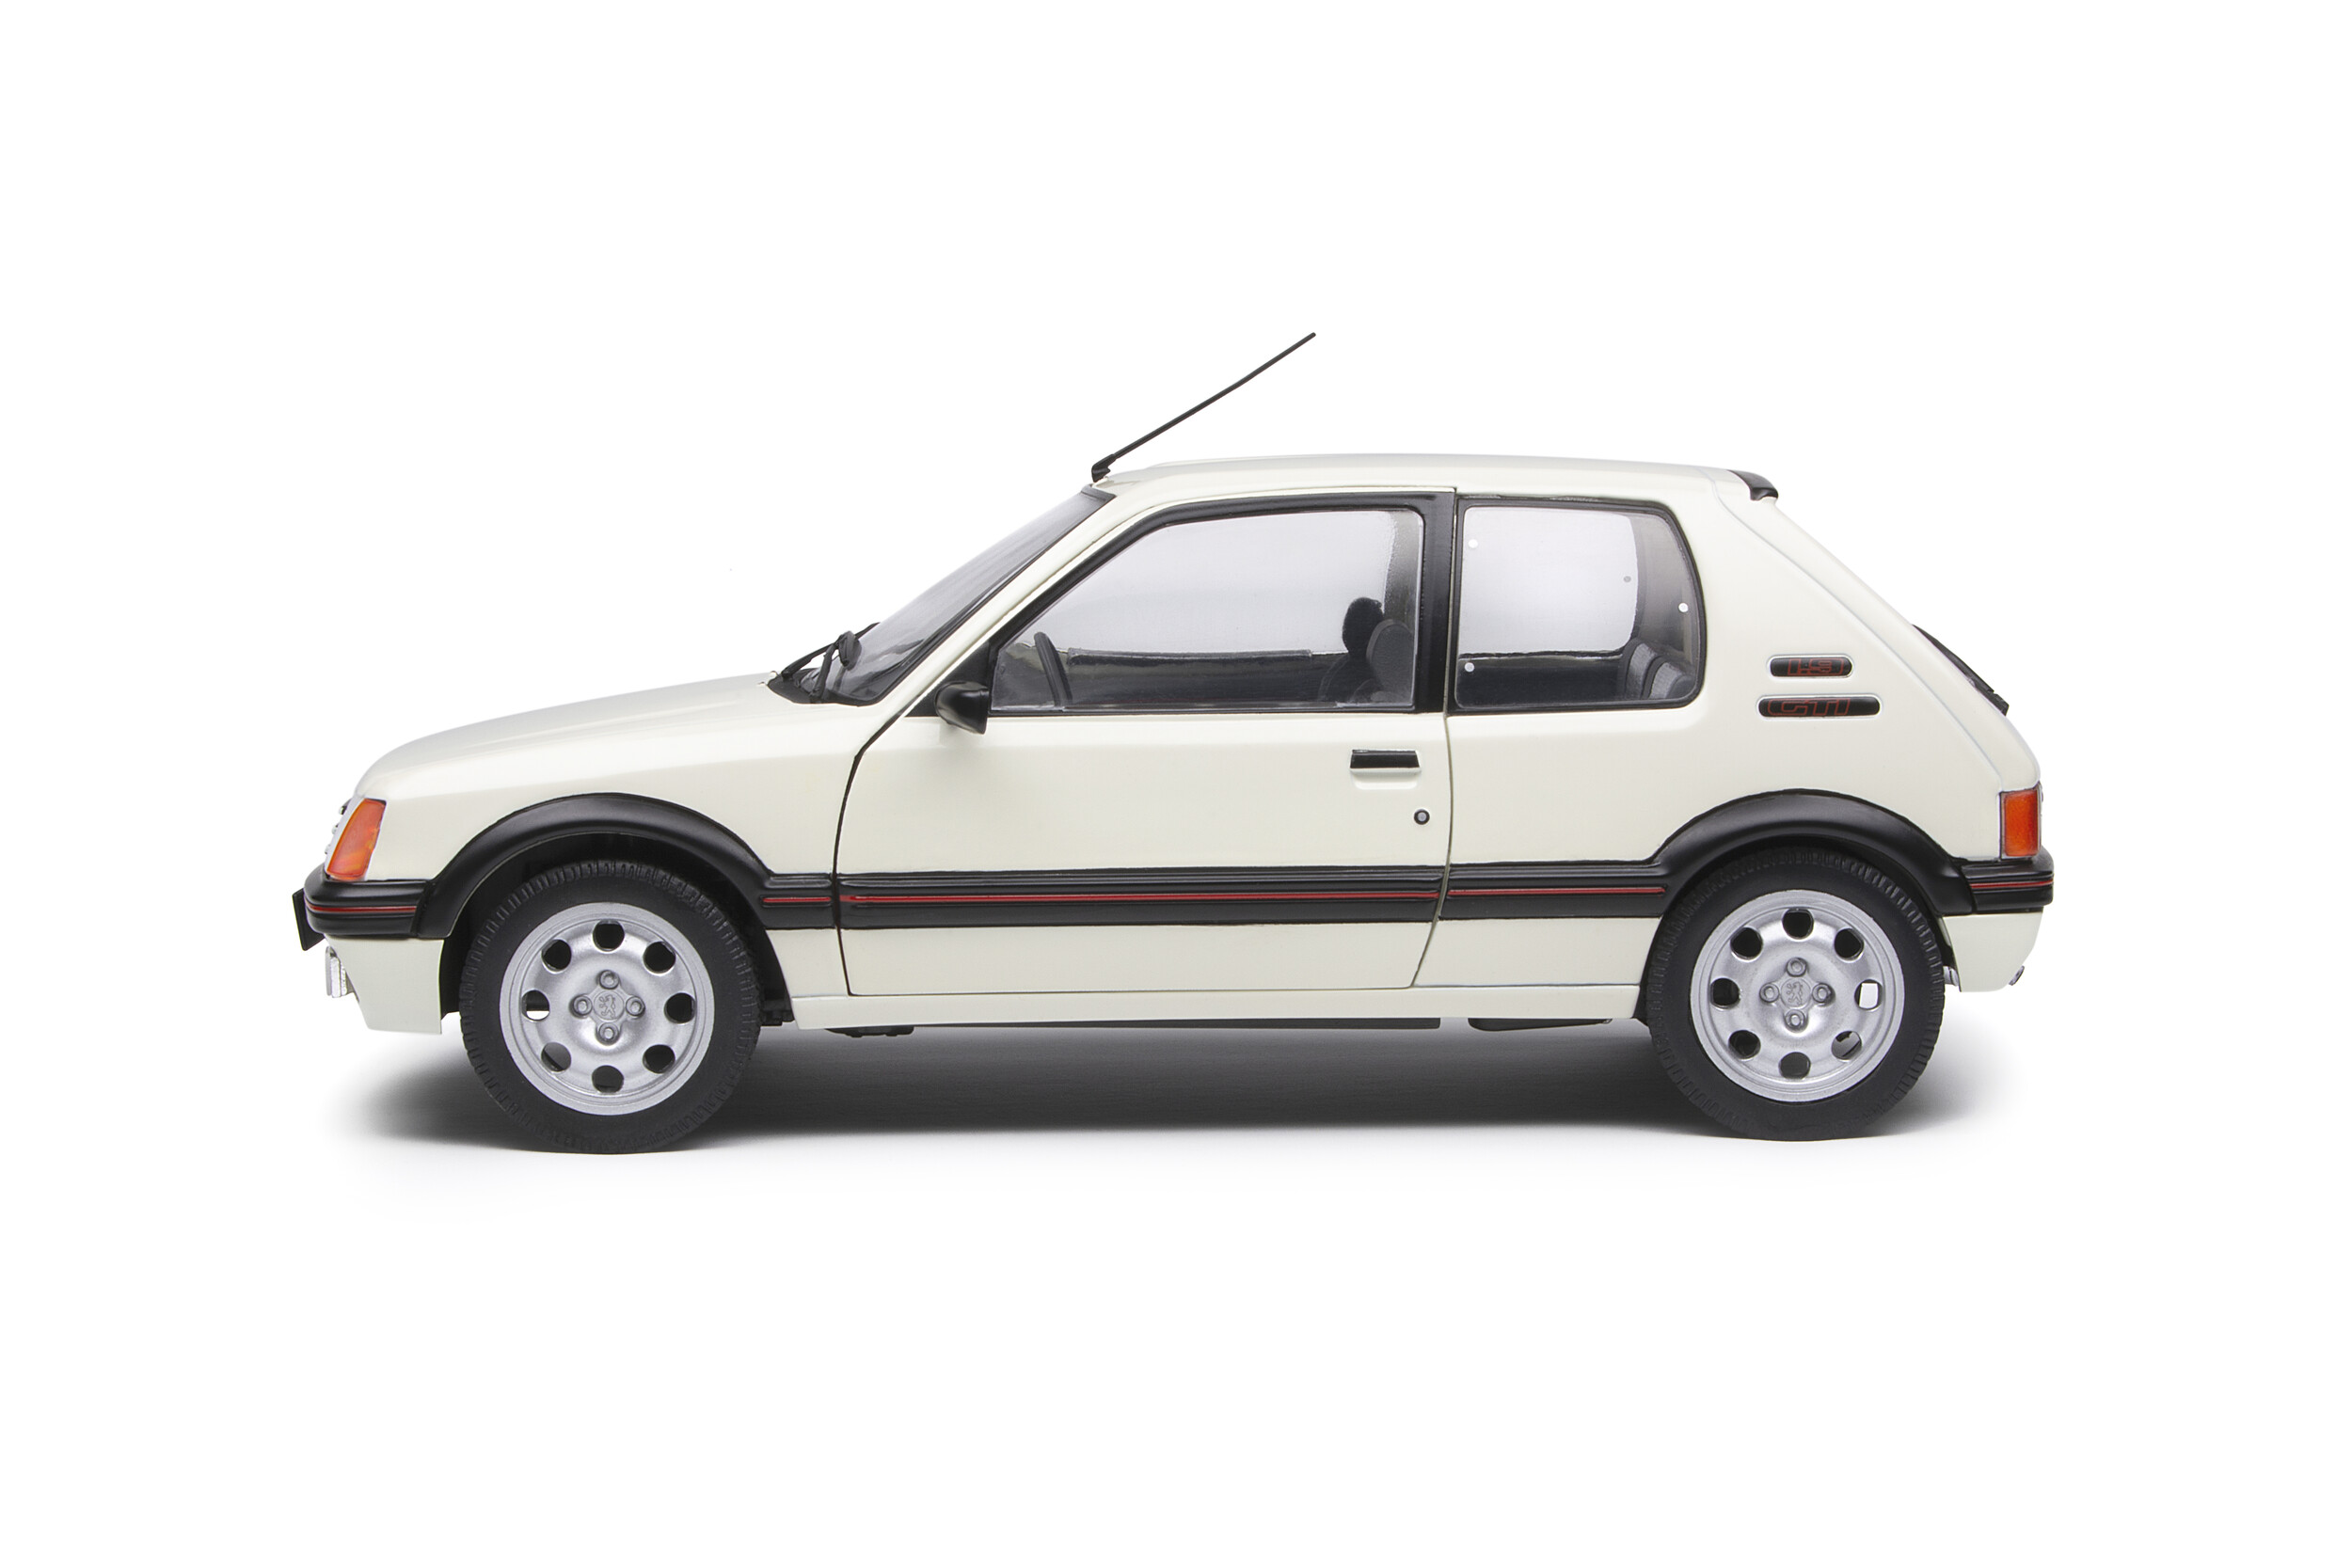 Pug1Off Peugeot 205 GTI 195 review  evo